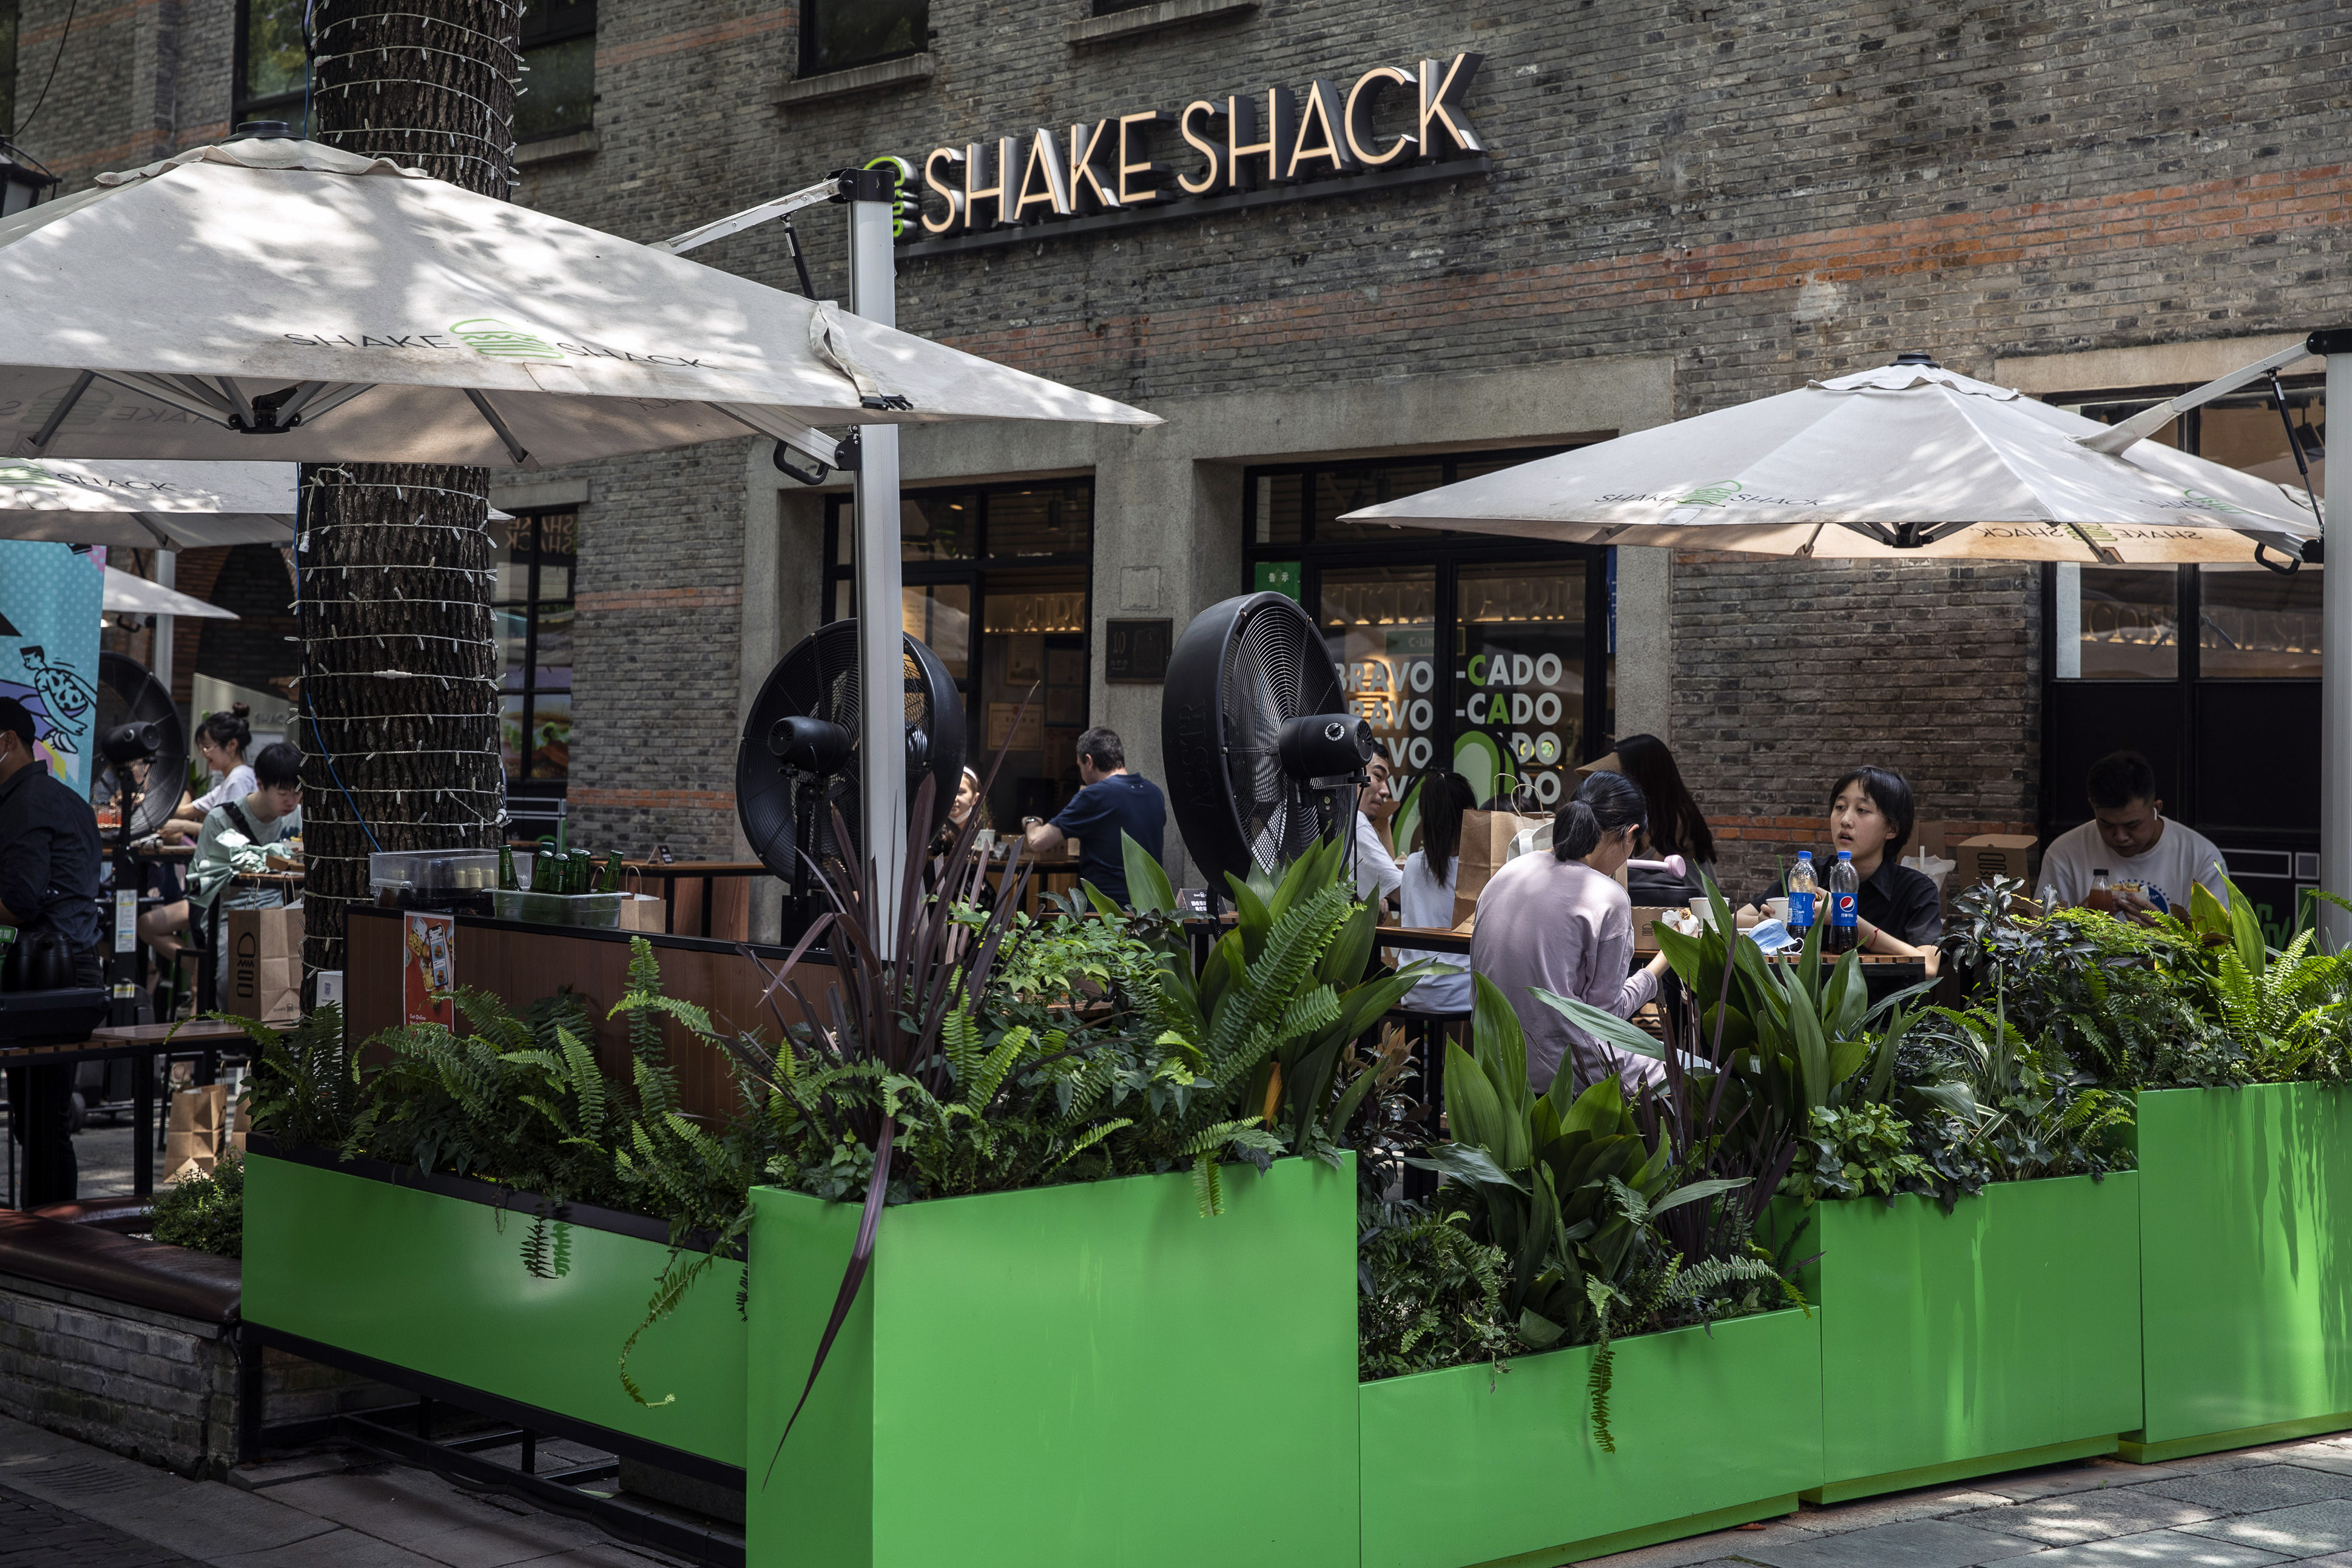 Customers at a Shake Shack restaurant in Shanghai on June 29. Lingering Covid-19 restrictions are making recovery more challenging for the service sector. Photo: Bloomberg